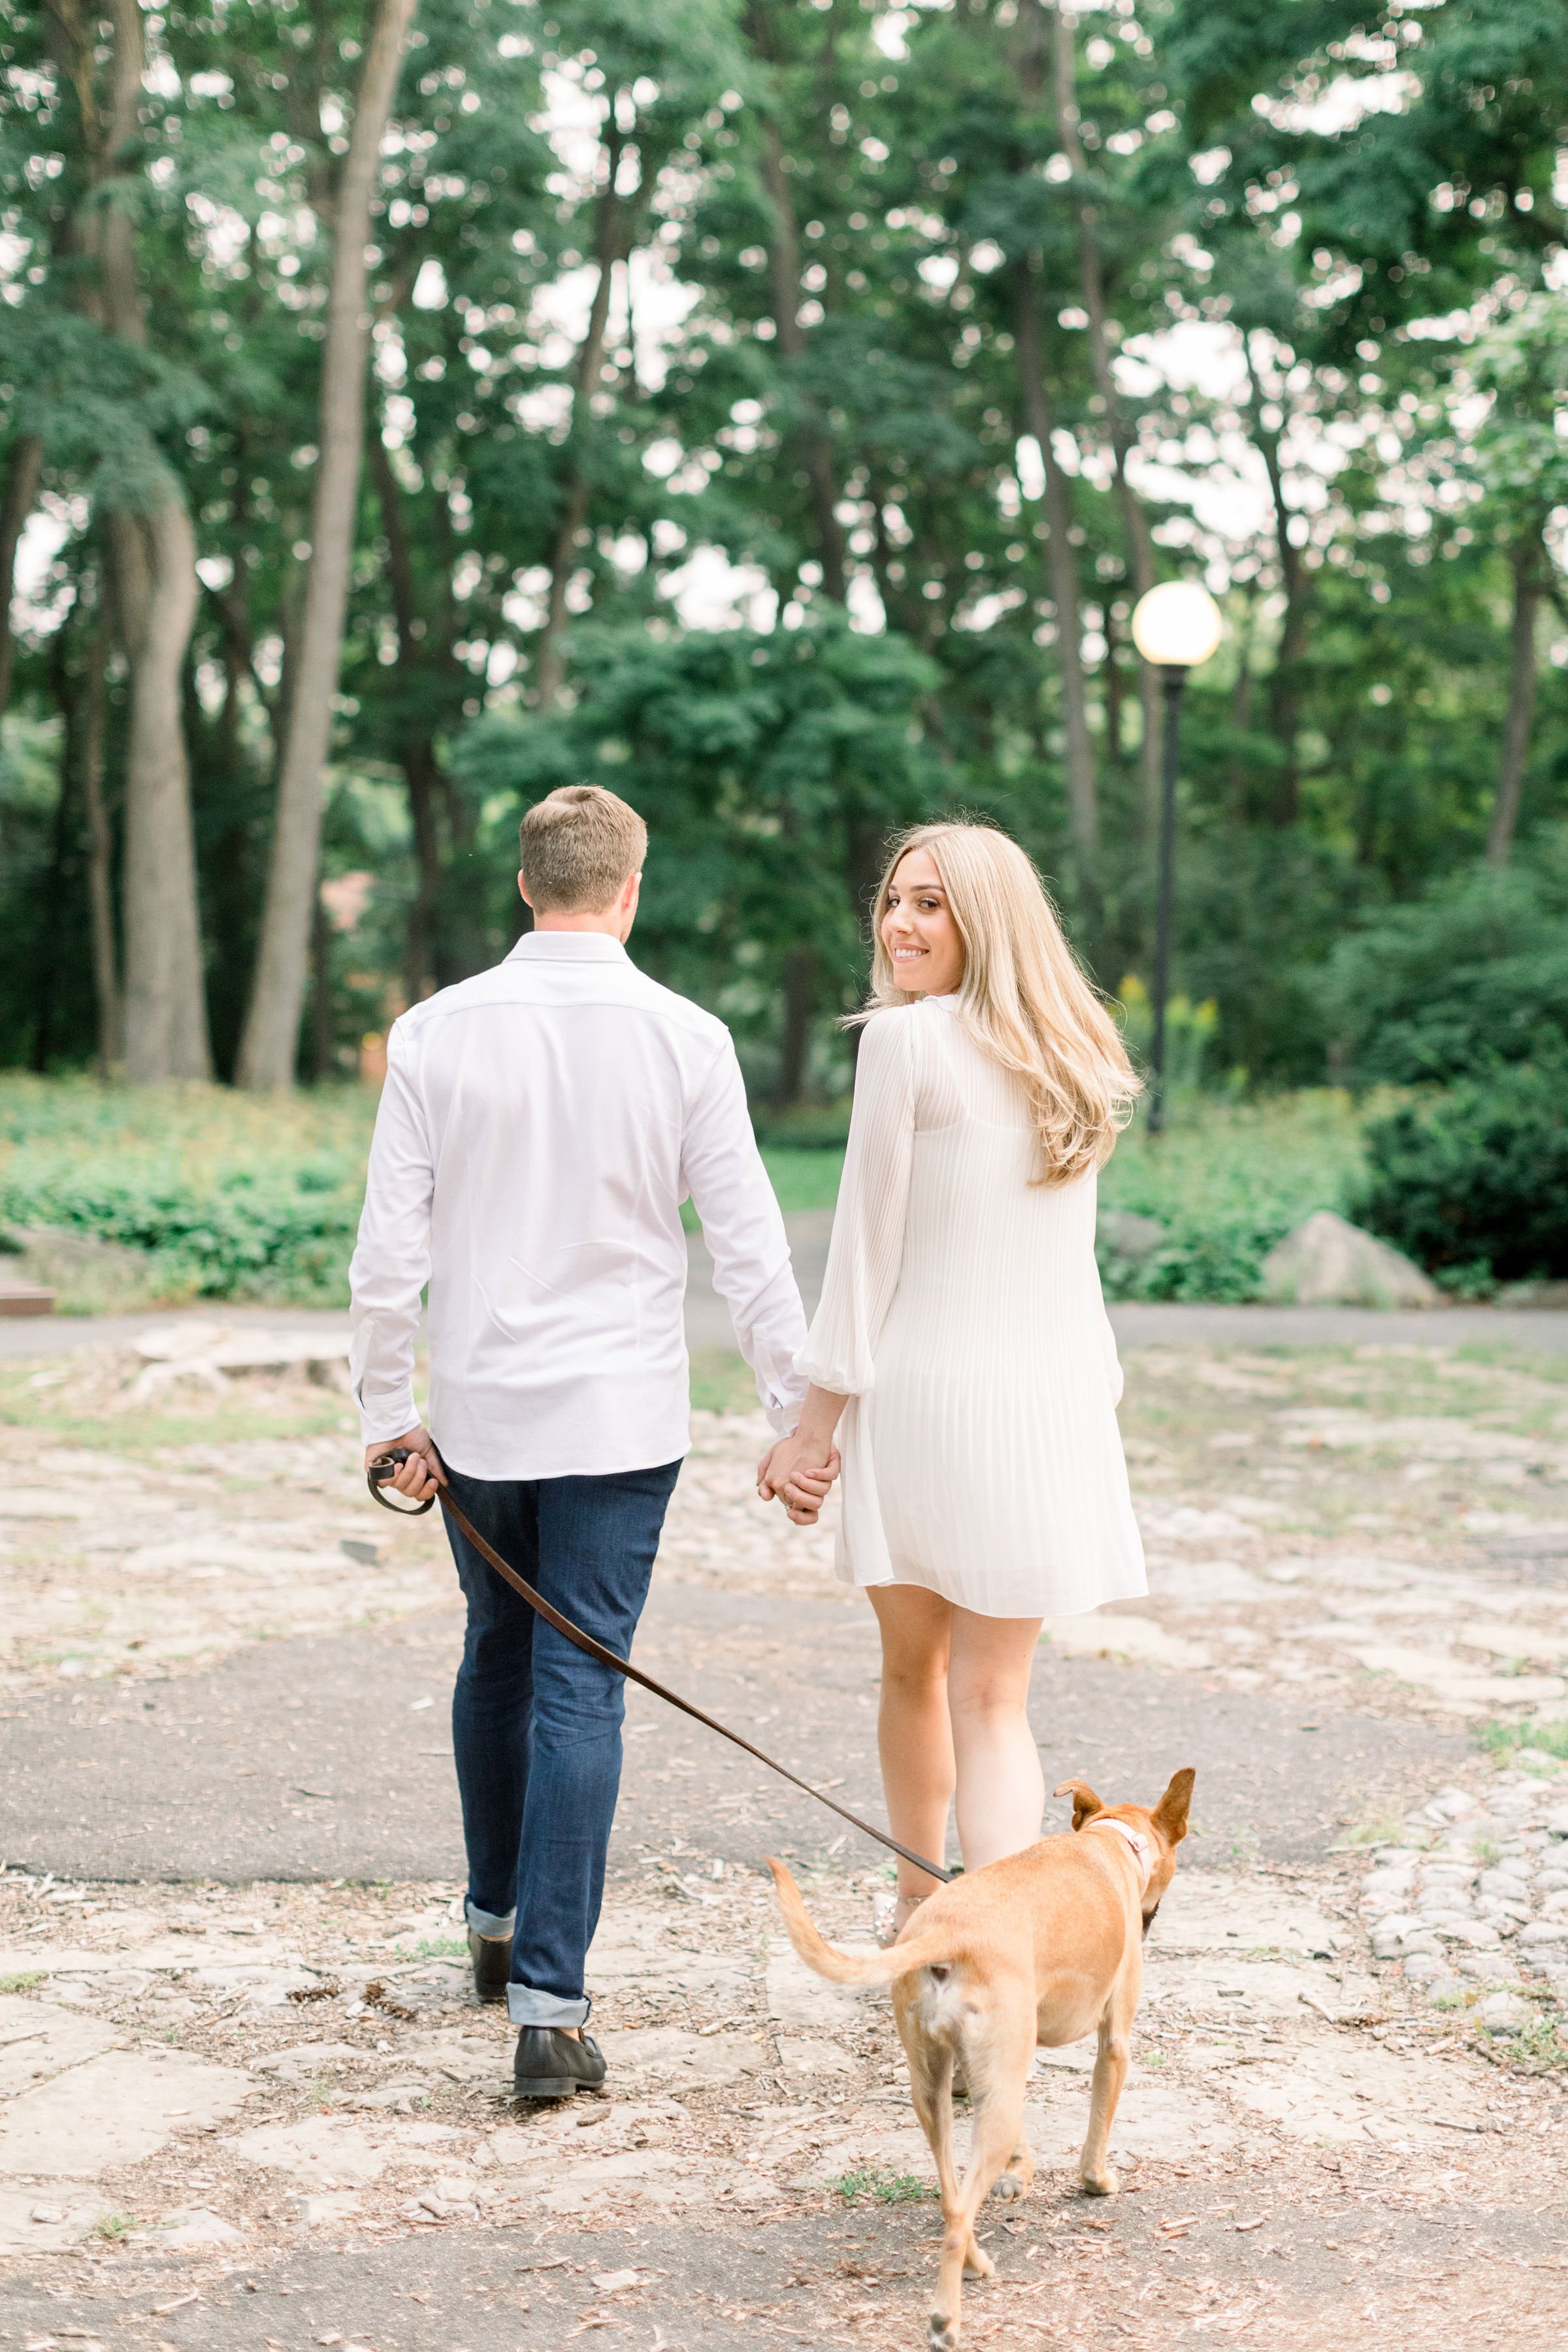  Holding hands with a man a woman looks over her shoulder and smiles by Chelsea Mason Photography. Engaged she said yes authentic #Ottawaengagements #Ottawaweddingphotographers #engagementwithdogs #ChelseaMasonPhotography #ChelseaMasonEngagements  